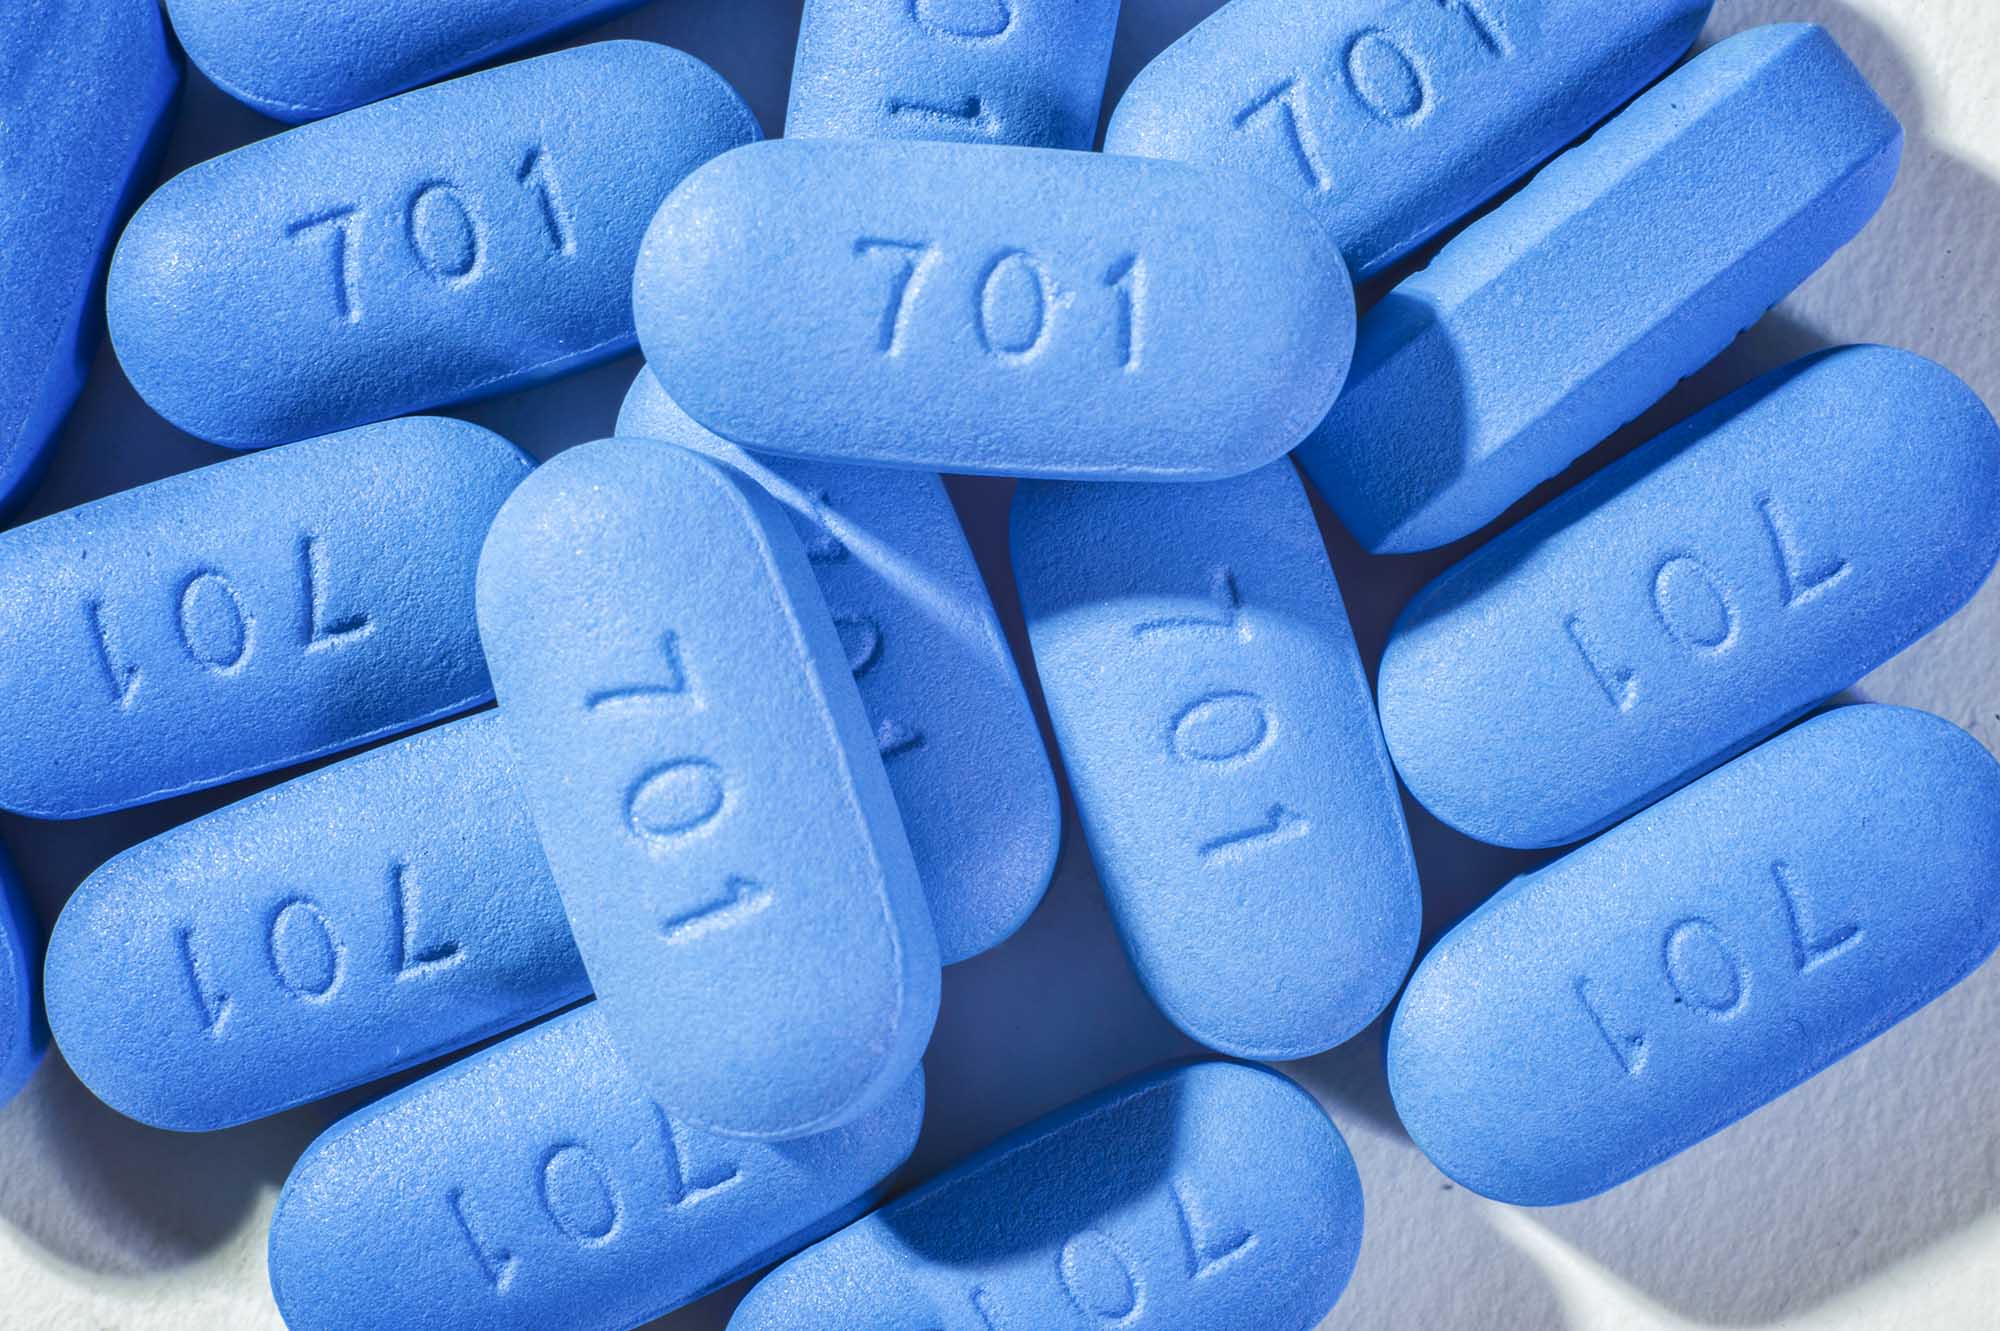 Blue pills with the number 701 on them